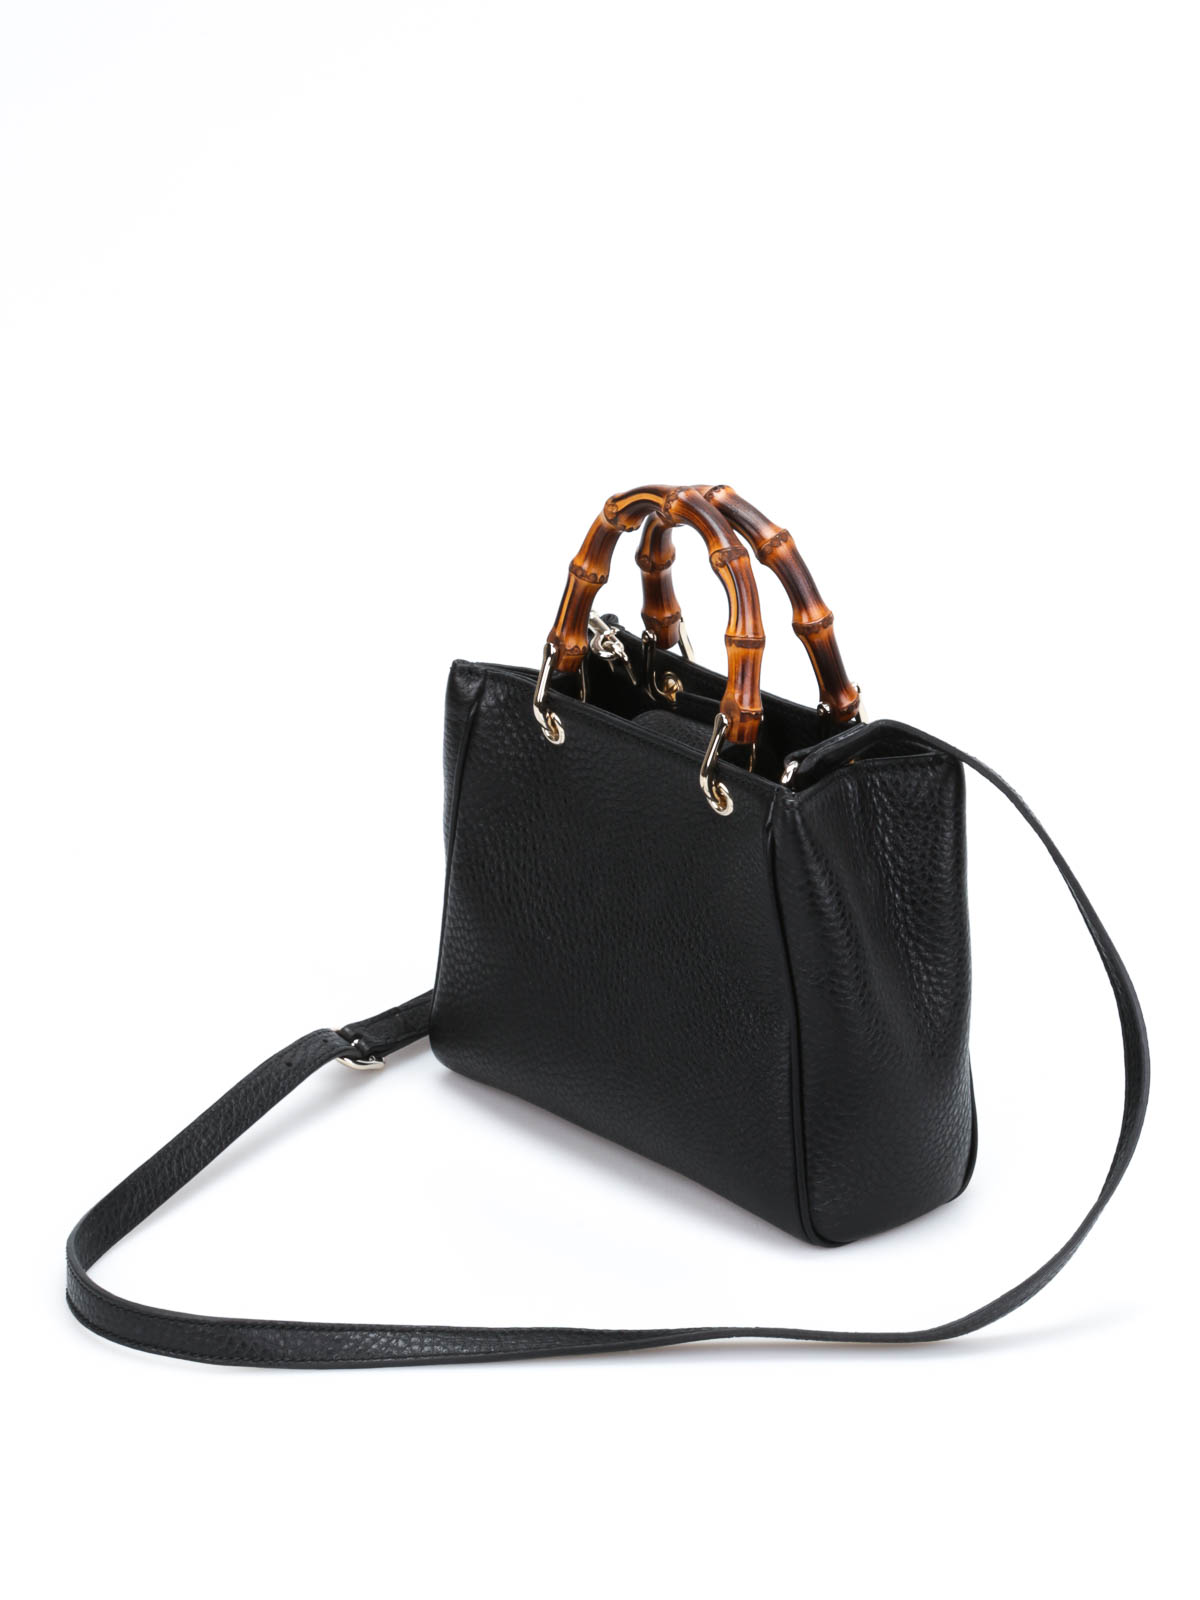 handle leather bag - totes bags 